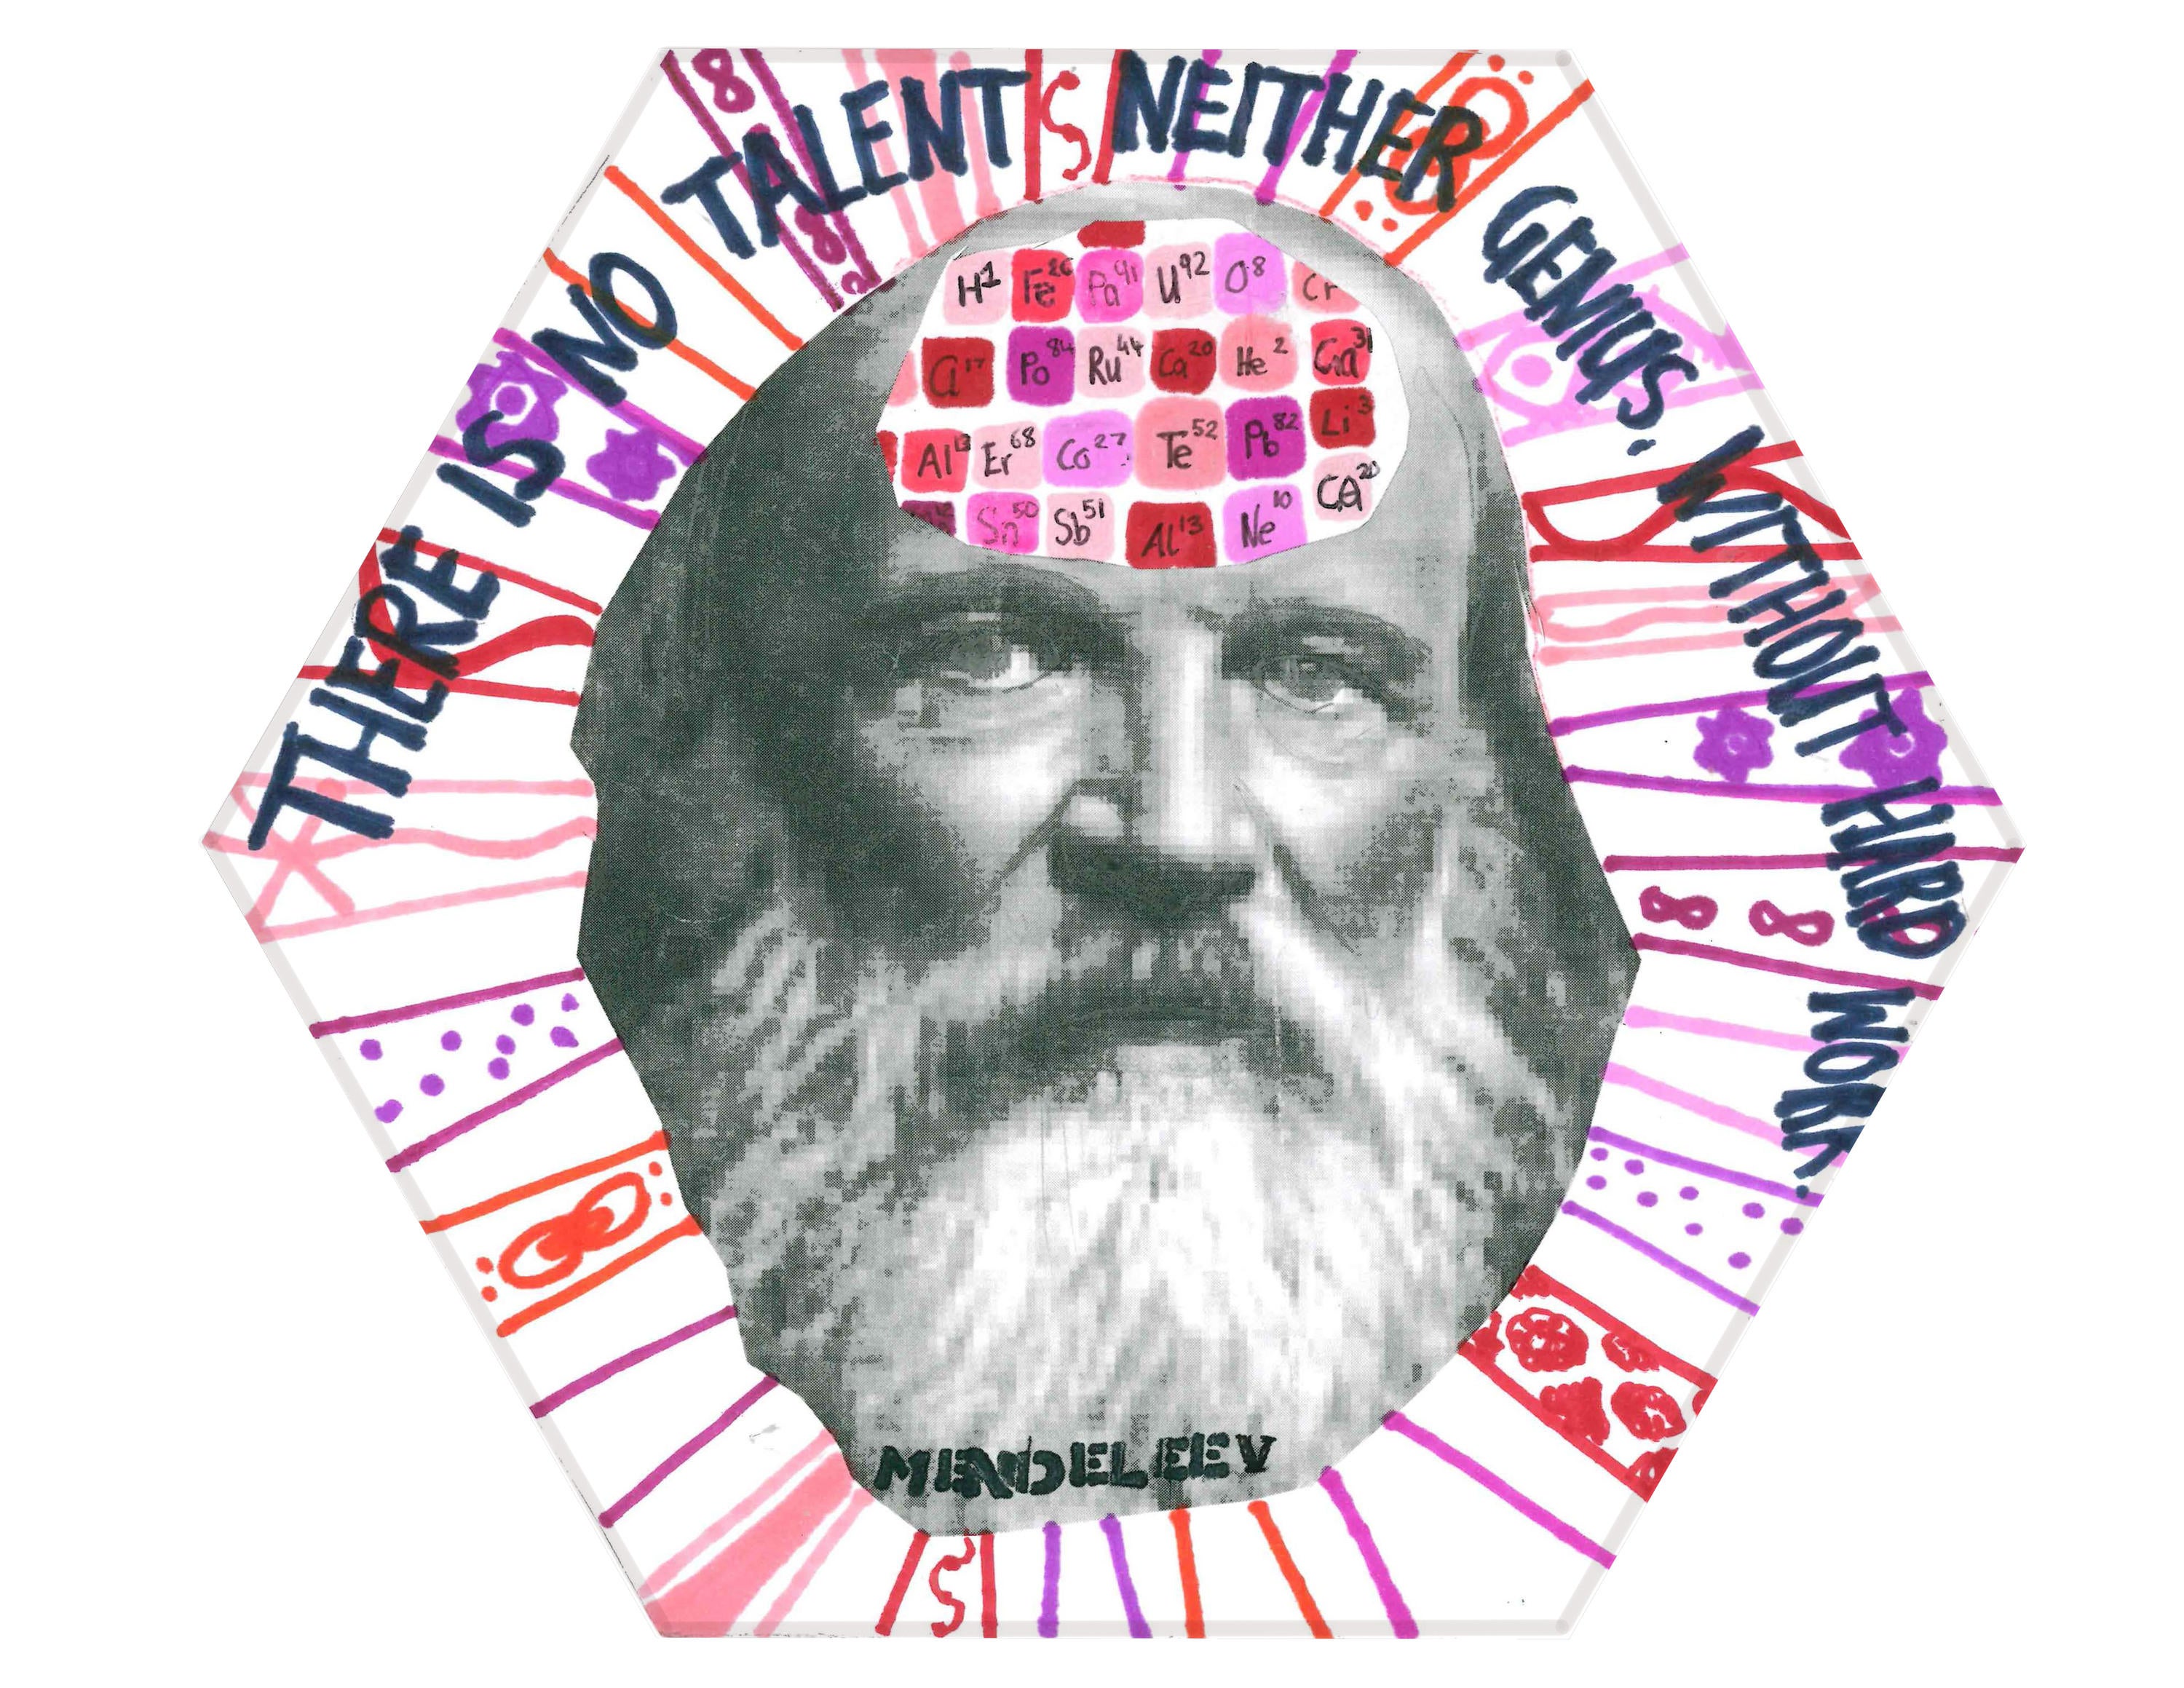 Portrait of Mendeleev of Mendeleev with a periodic table on this head and caption that says “There is no talent neither genius, without hard work”